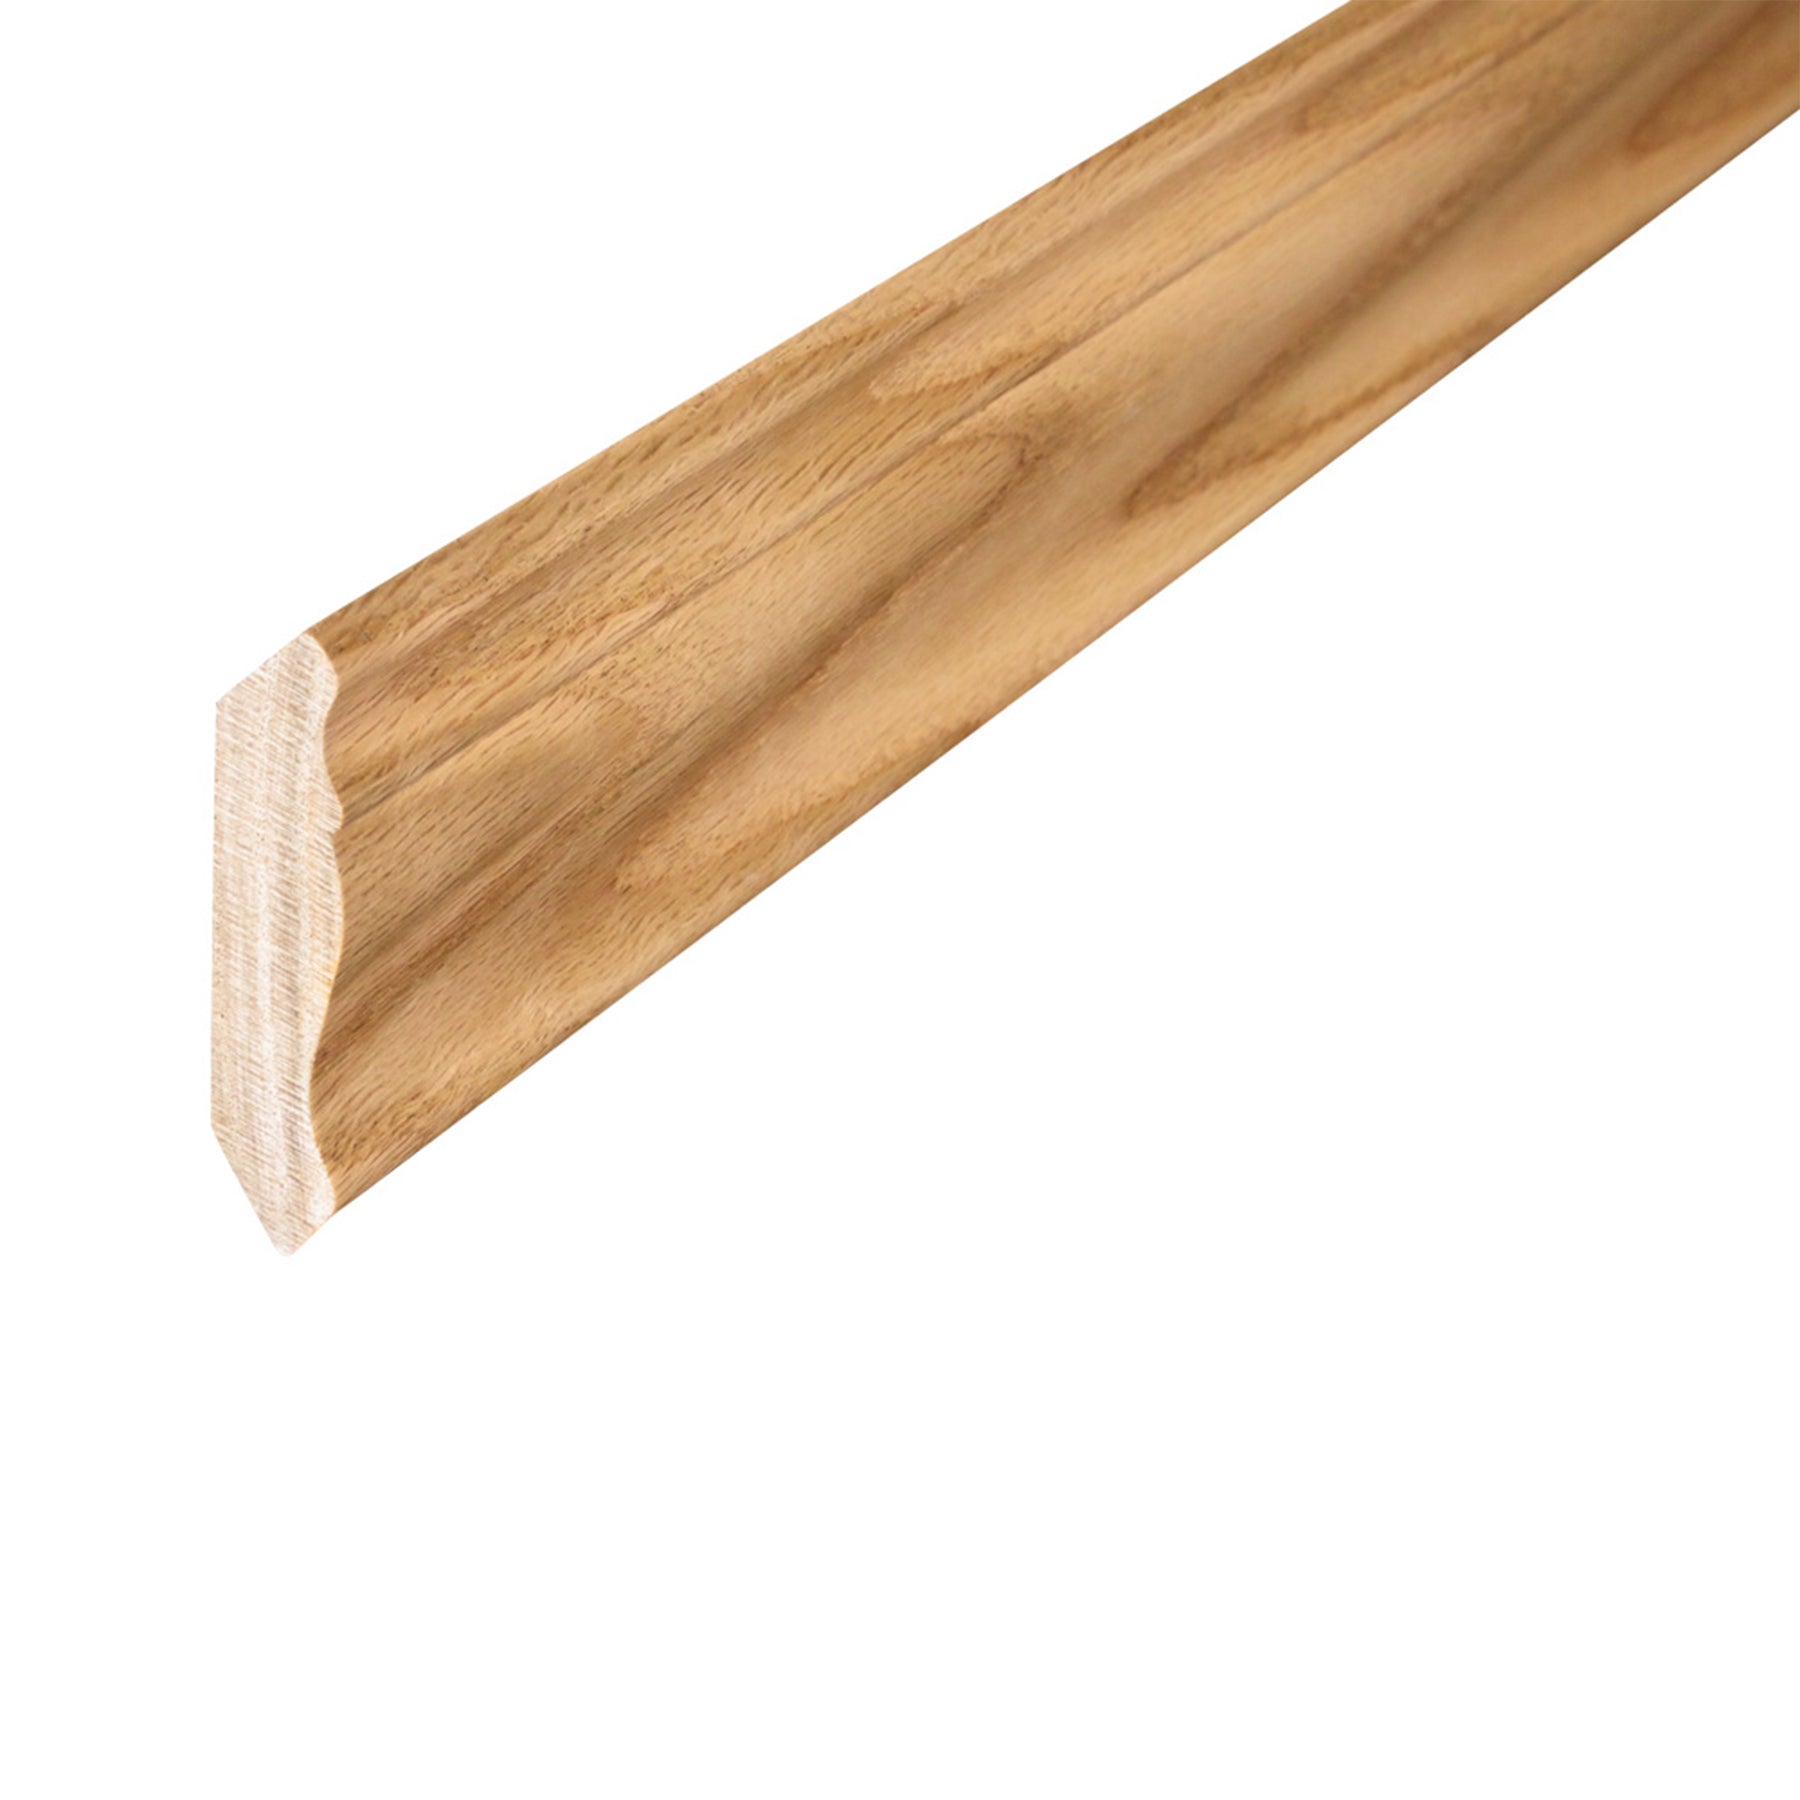 Large Crown Molding - 2-3/8 Inch x 2-3/16 Inch x 96 Inch - Chadwood Shaker - Kitchen Cabinet